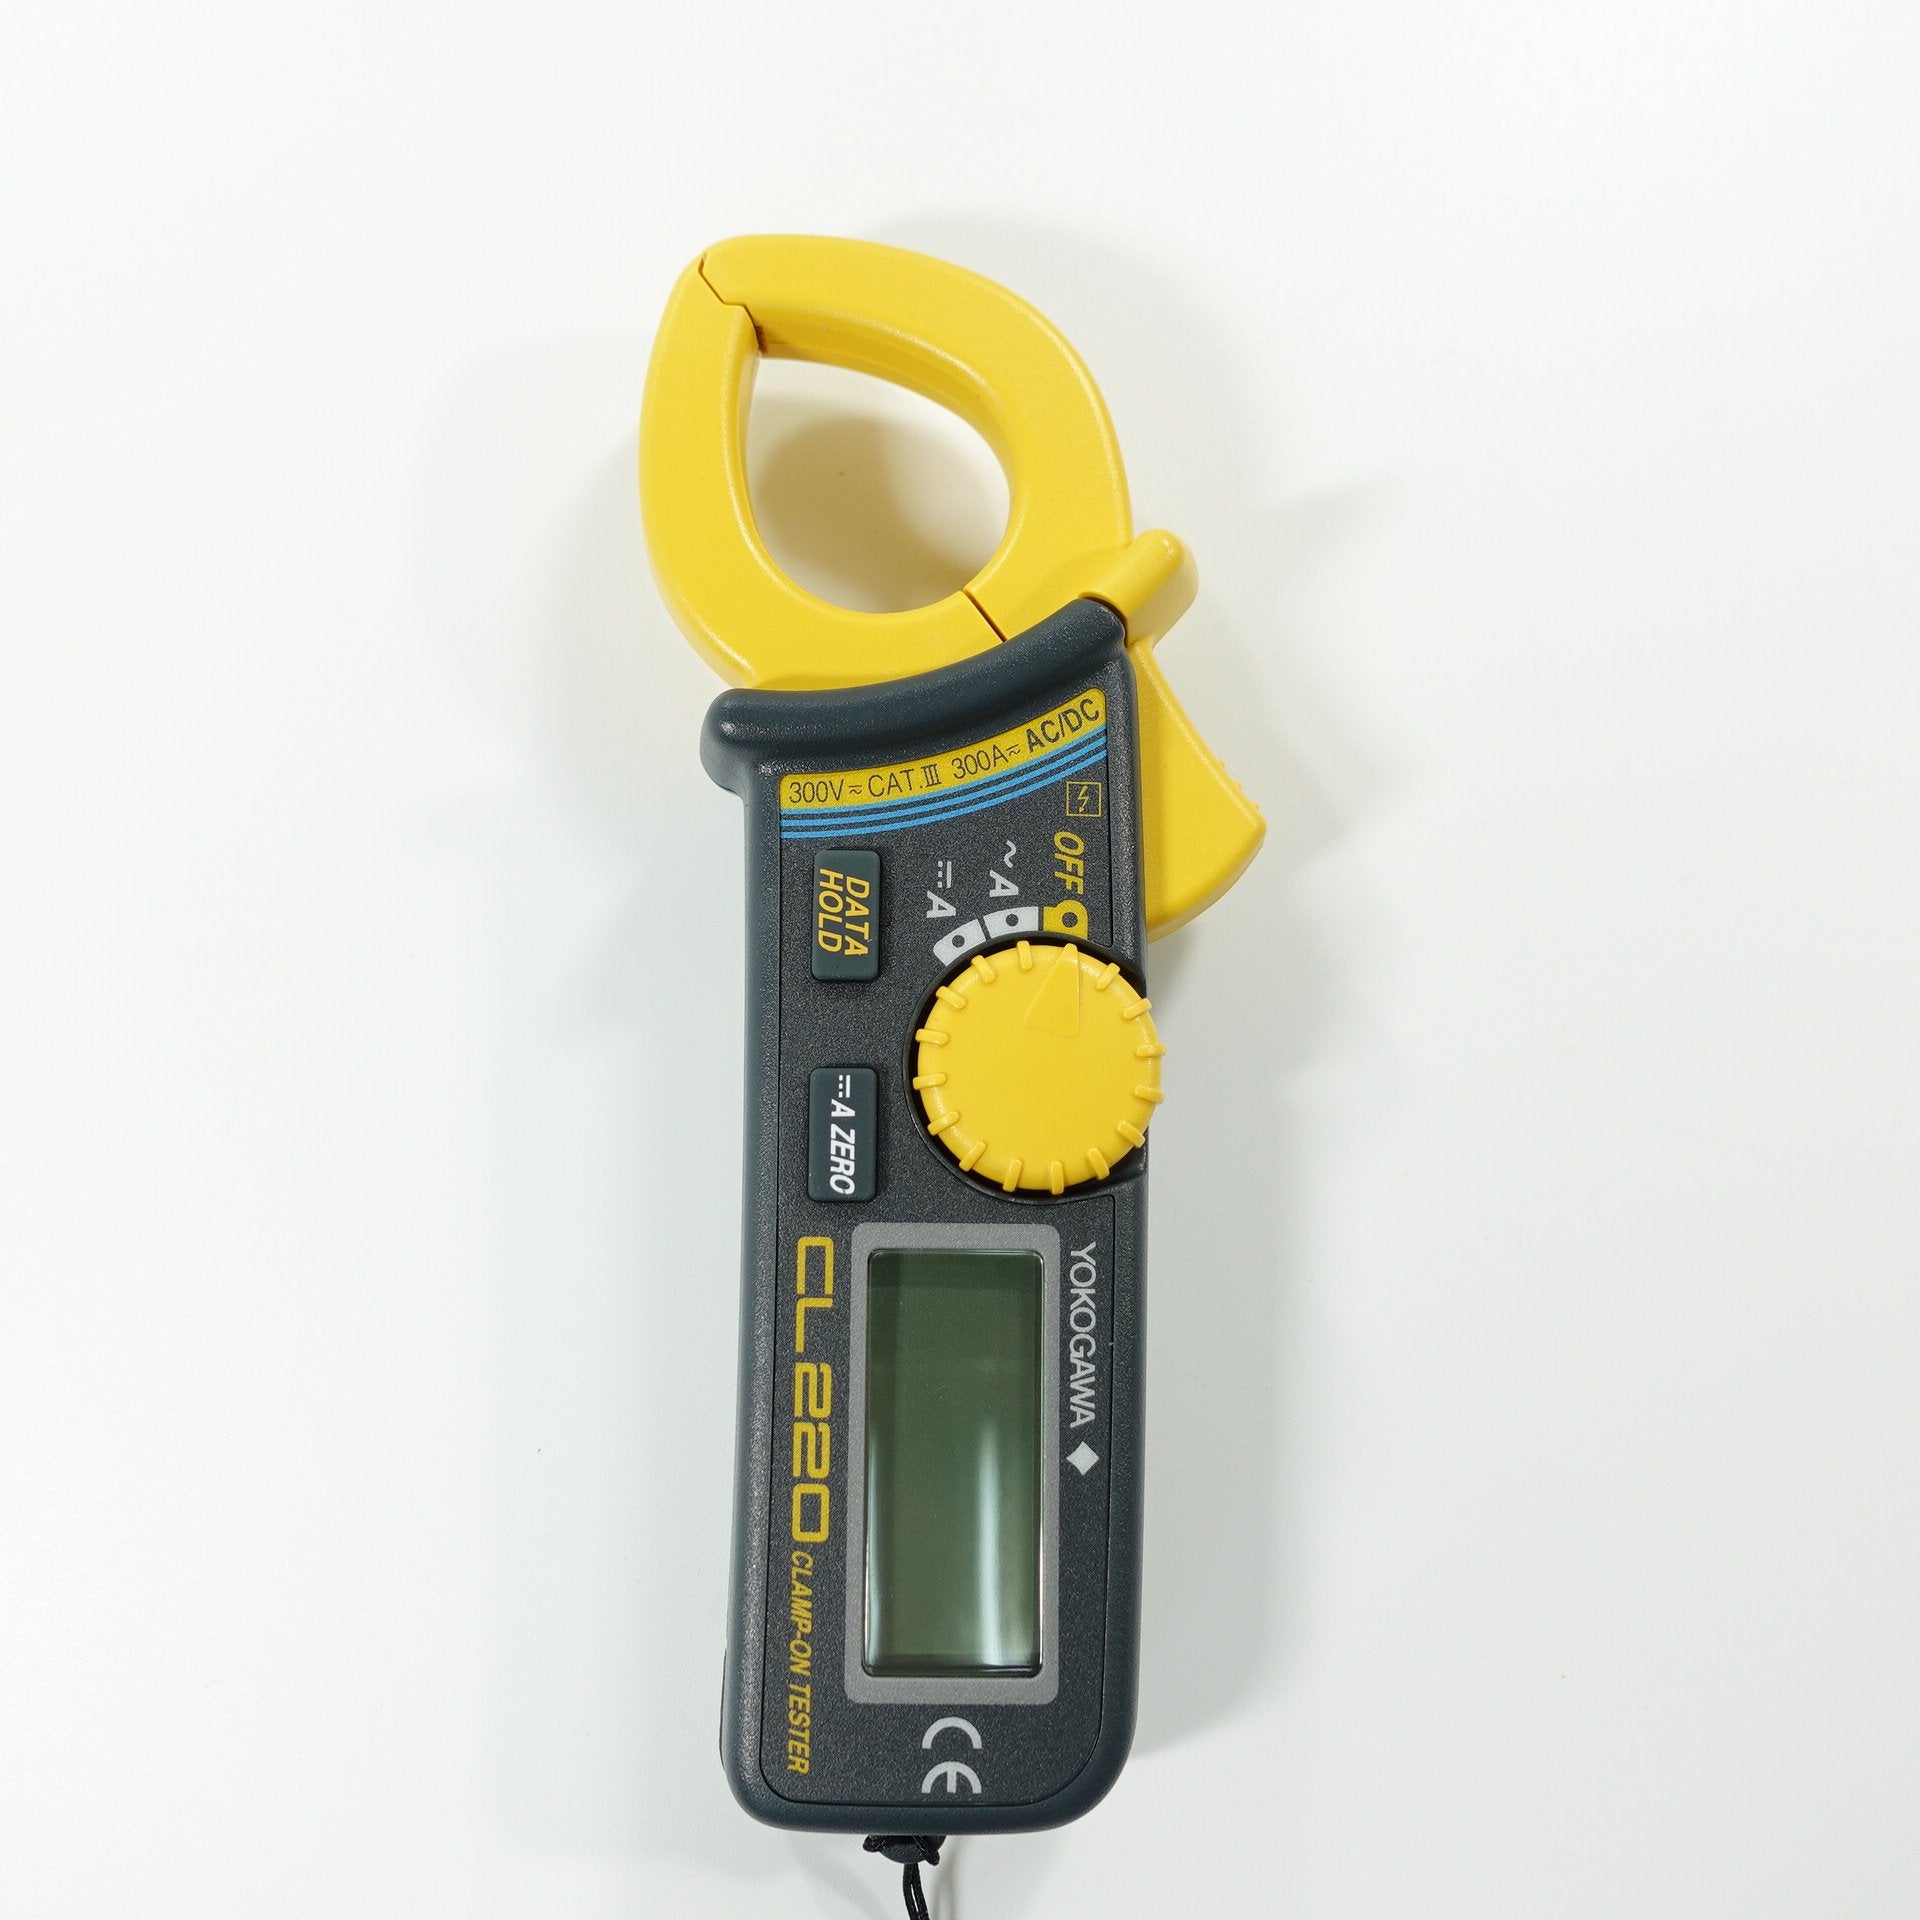 FOR USA  EUROPE] YOKOGAWA CL220 CLAMP TESTER [EXPORT ONLY] – 道具屋さん 本店 (ACE  SANGYO)